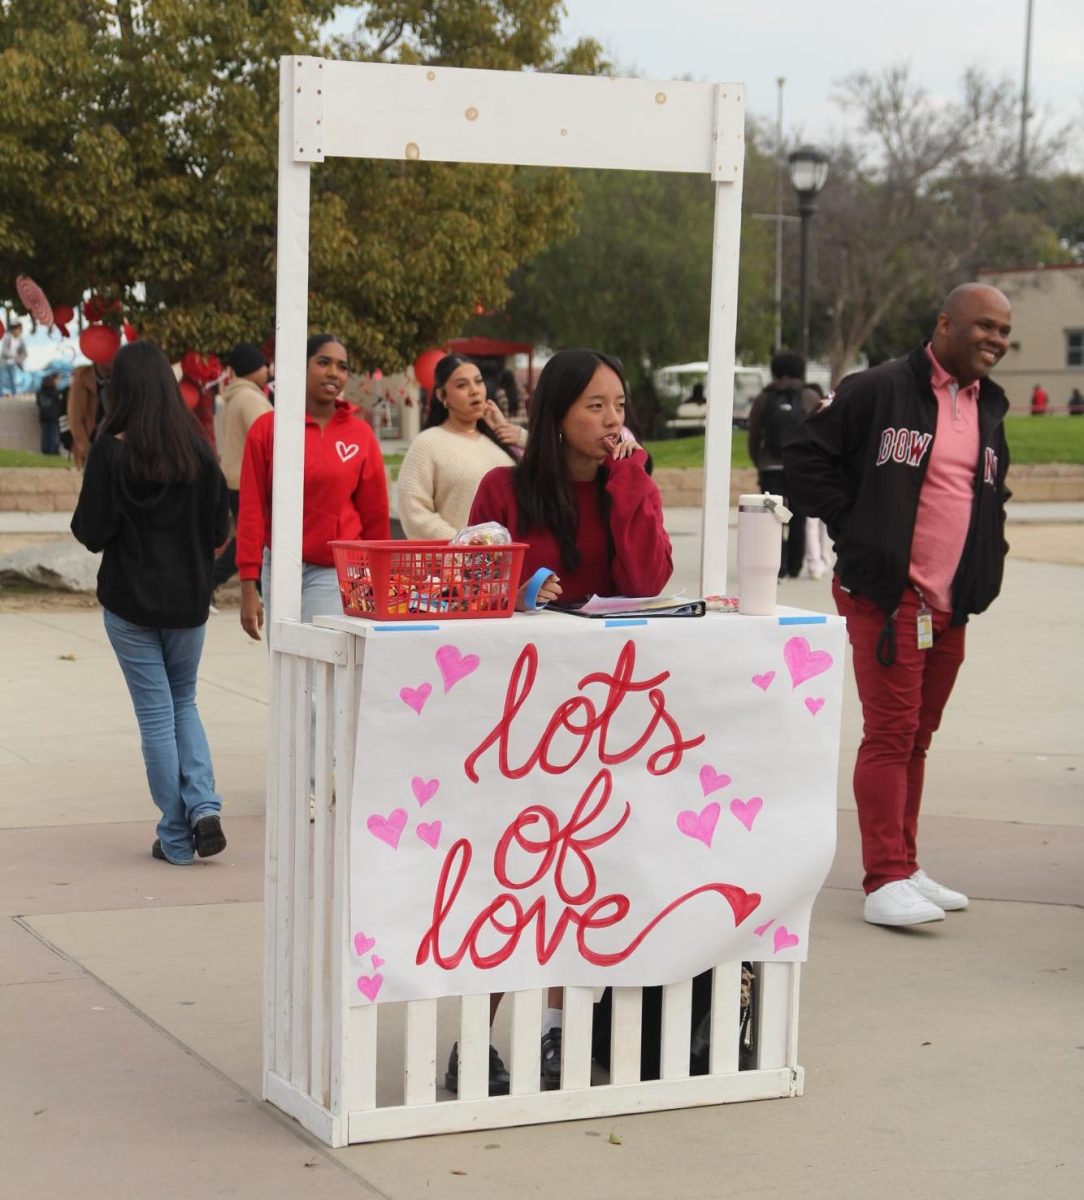 Downeys very own Kissing booth was in full force on Valentines, trading in your paper heart for a chocolate kiss.